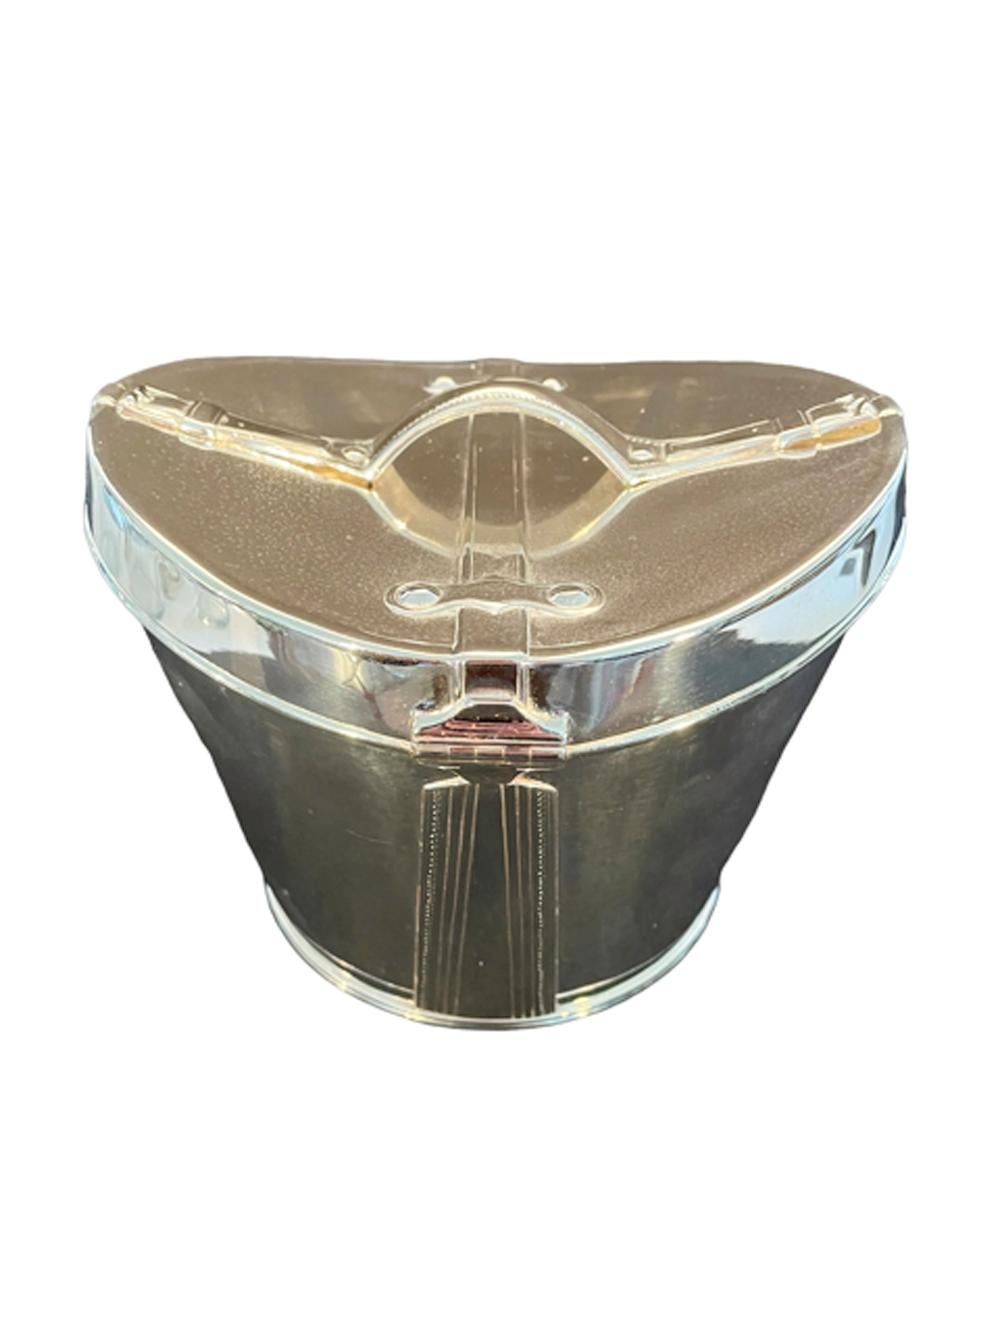 Art Deco Silver Plate Novelty Biscuit Box in the Form of a Victorian Top Hat Box For Sale 1